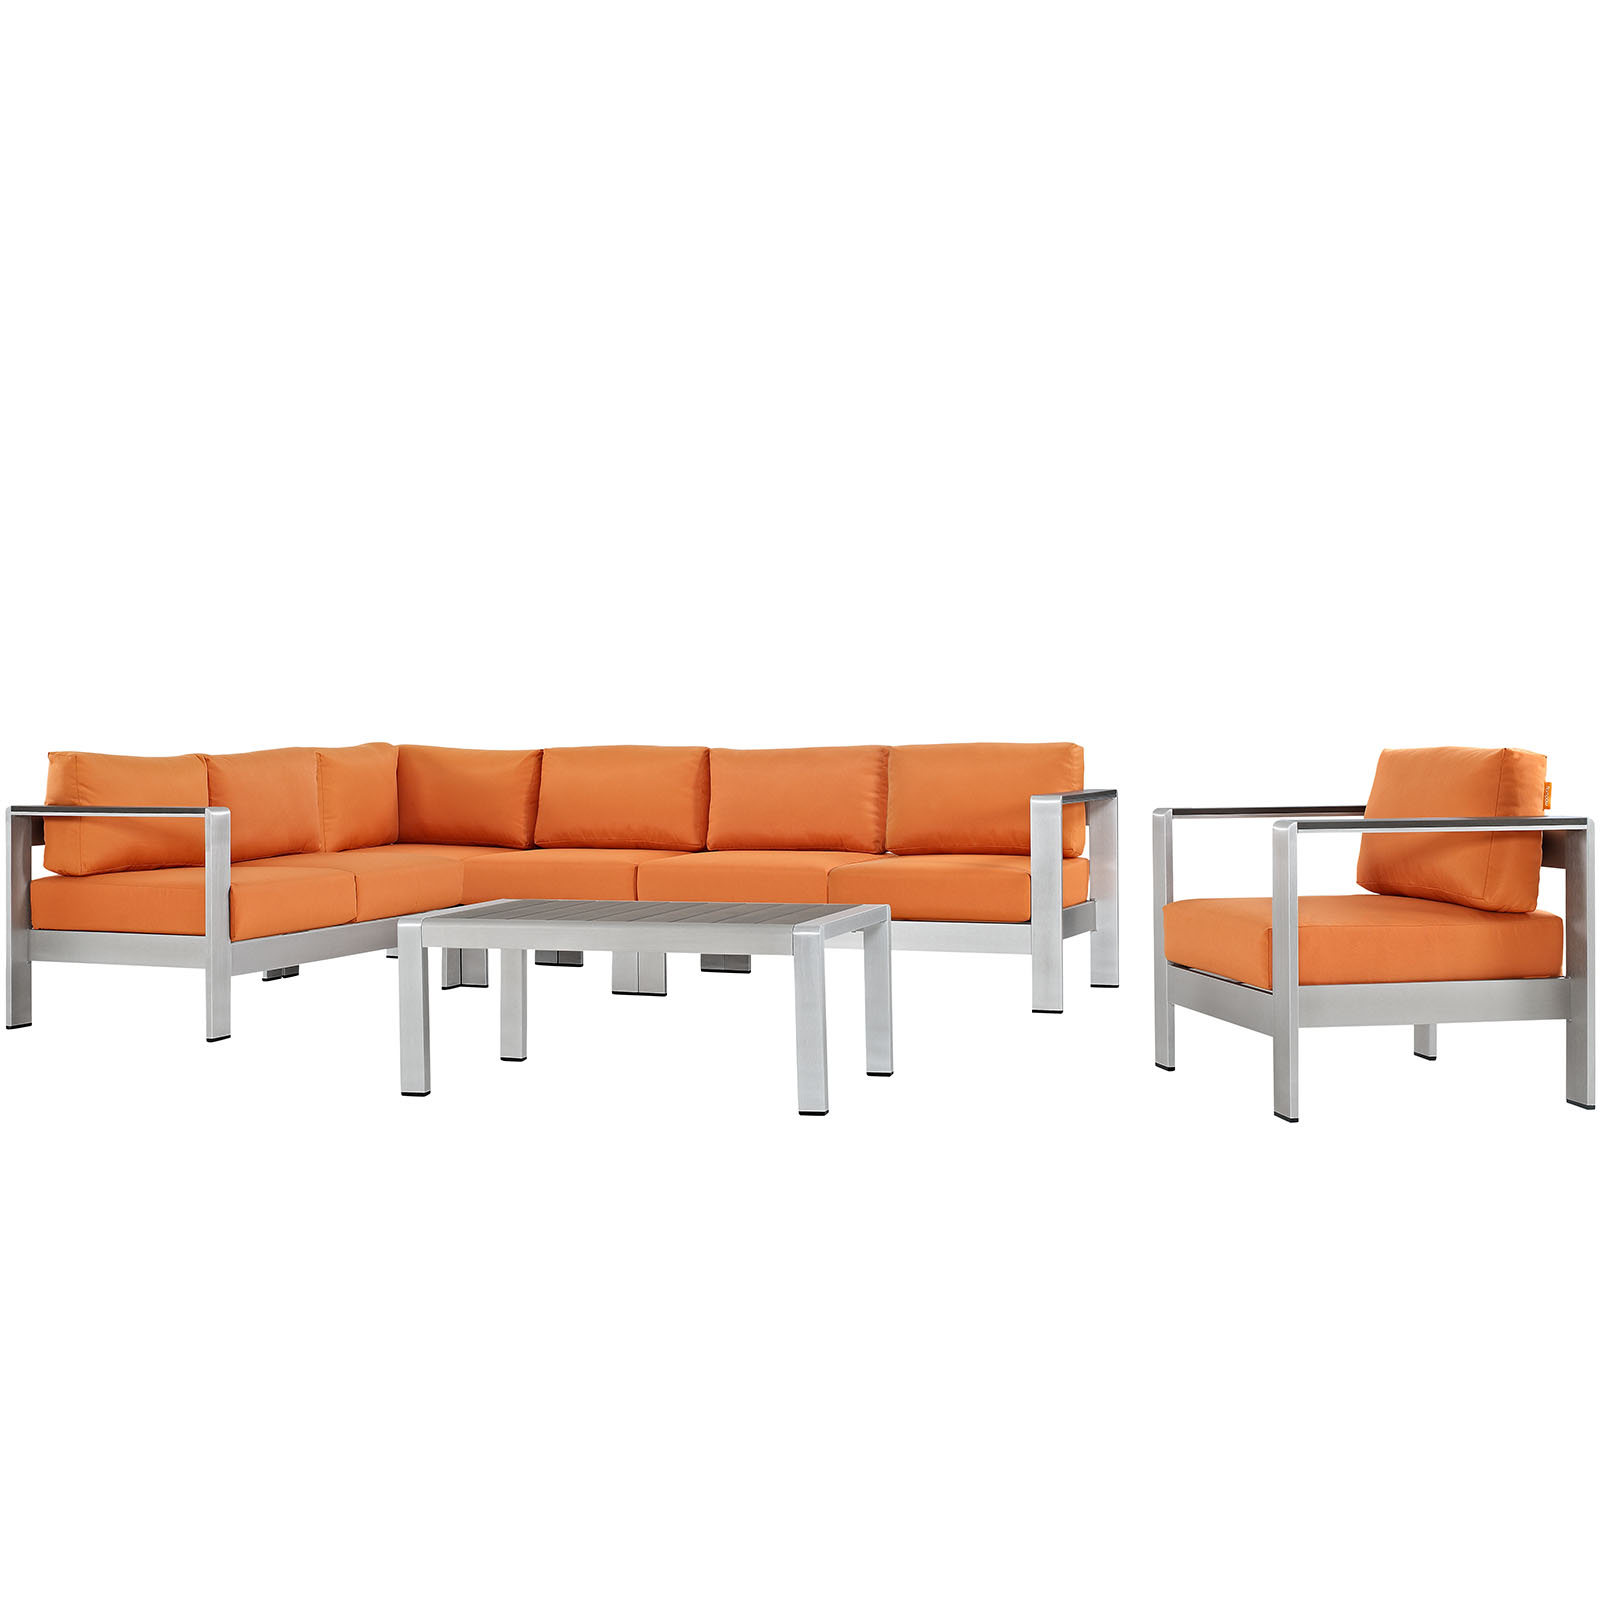 Modway Shore 6 Piece Outdoor Patio Aluminum Sectional Sofa Set in Silver Orange - image 2 of 8